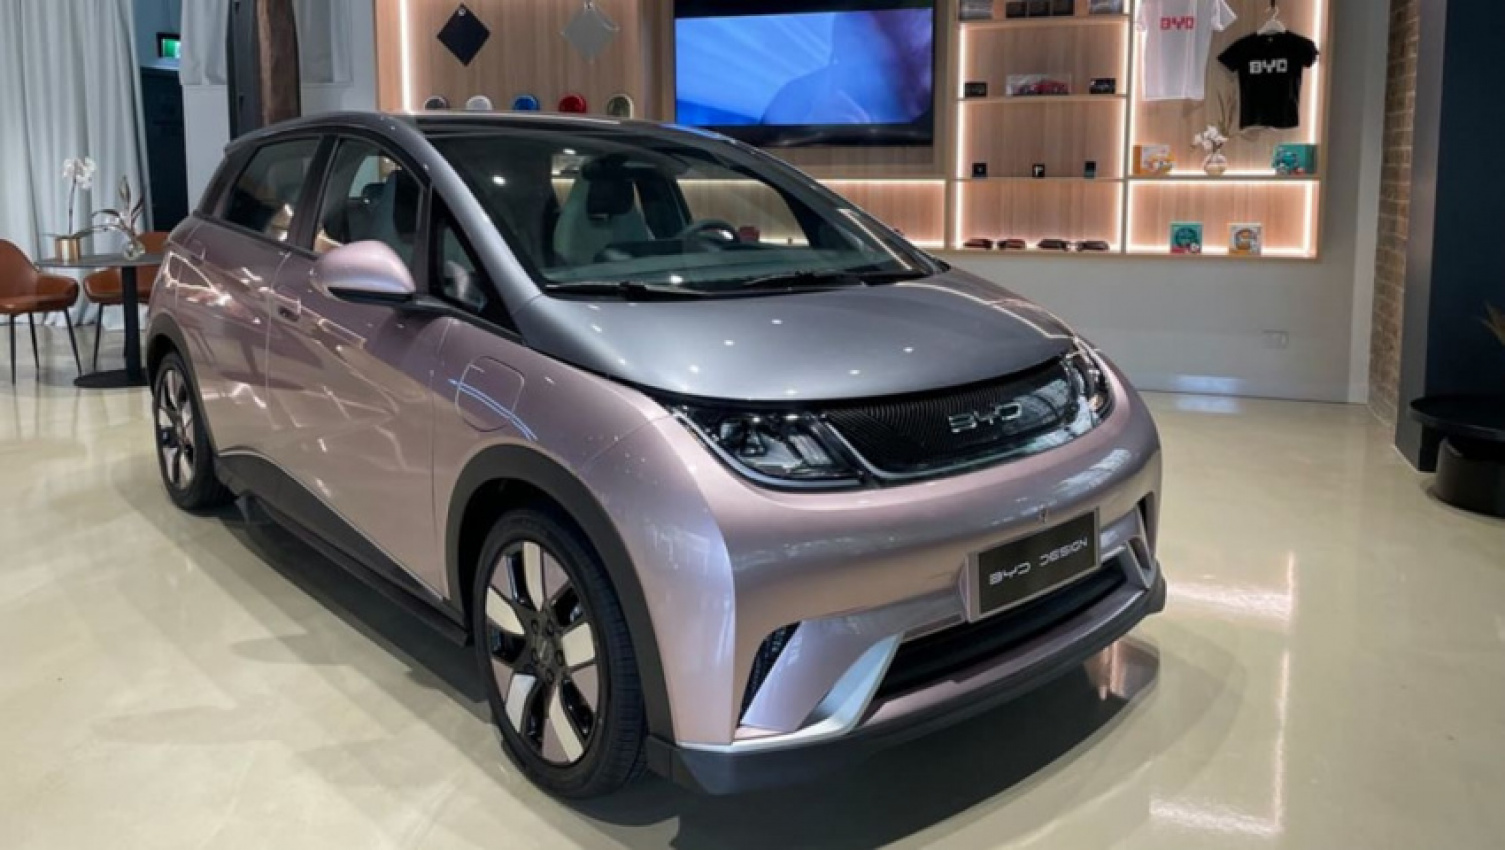 autos, byd, cars, byd atto 3, byd atto 3 2022, byd news, electric, electric cars, hatchback, industry news, showroom news, australian customer feedback crucial to byd success: chinese electric car brand to make ongoing improvements based on owner experiences